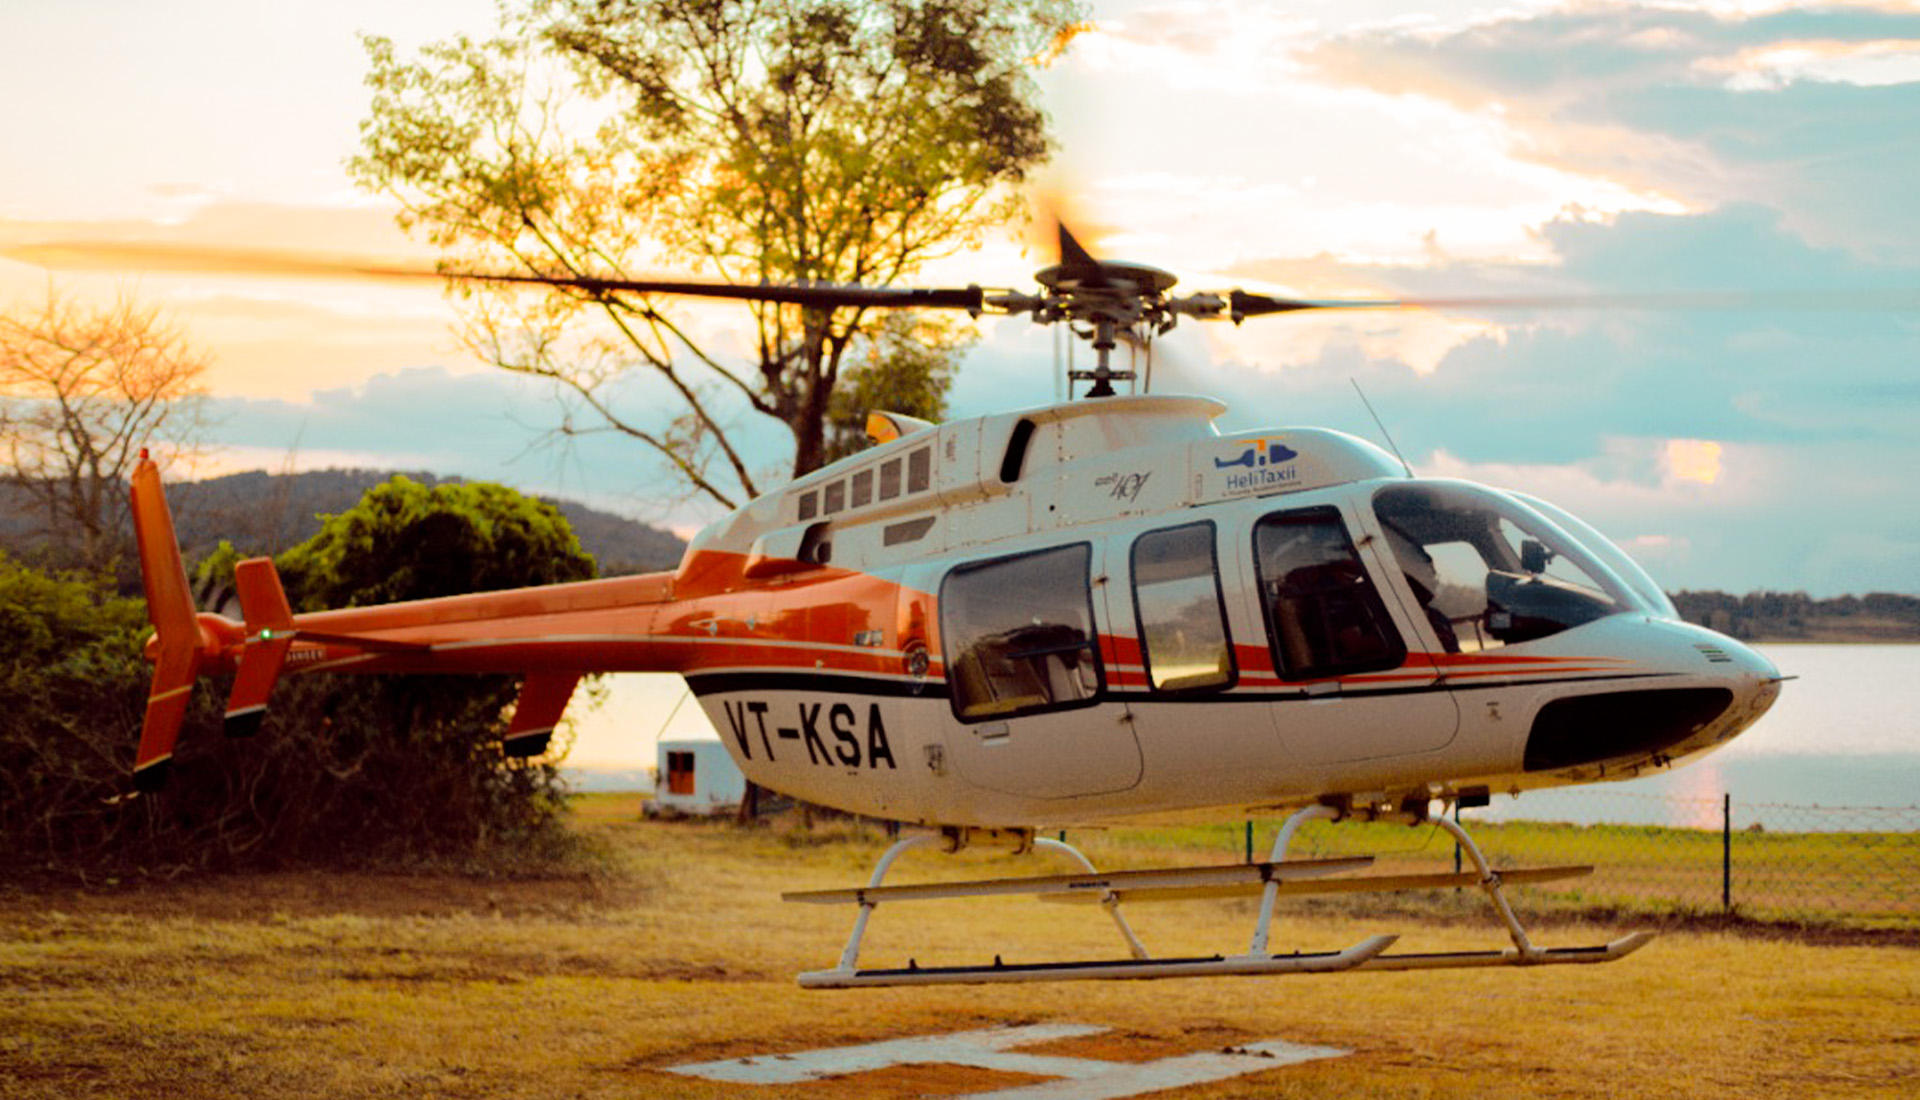 Heli taxi Service | Helicopter Tourism Service in Karnataka